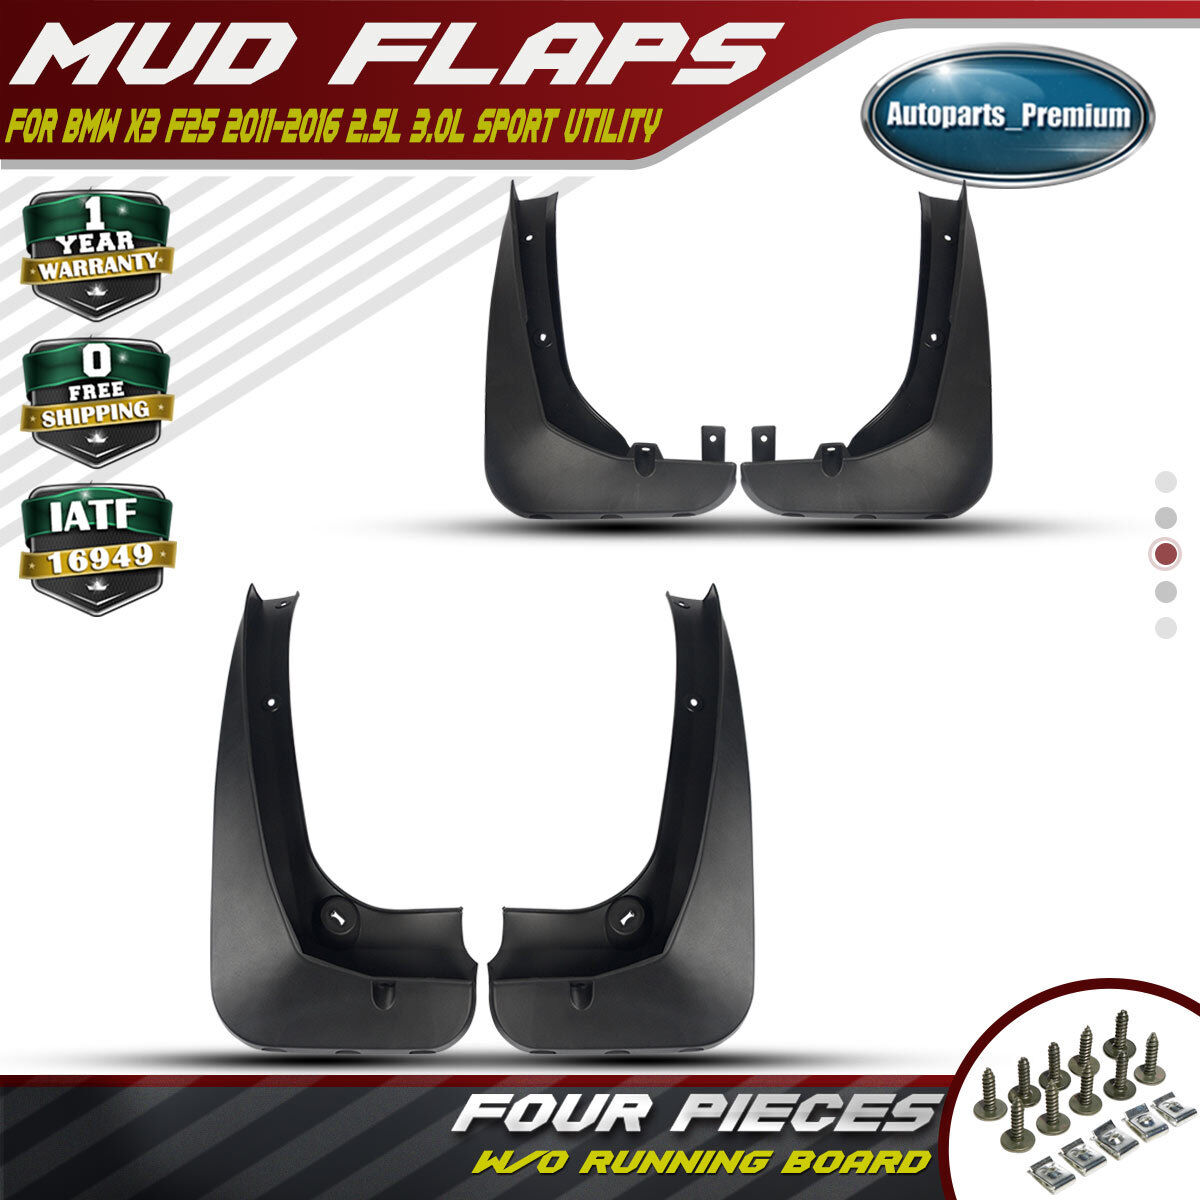 4x Splash Guards Mud Flaps Molded Front & Rear New for BMW X5 E70 2008-2013